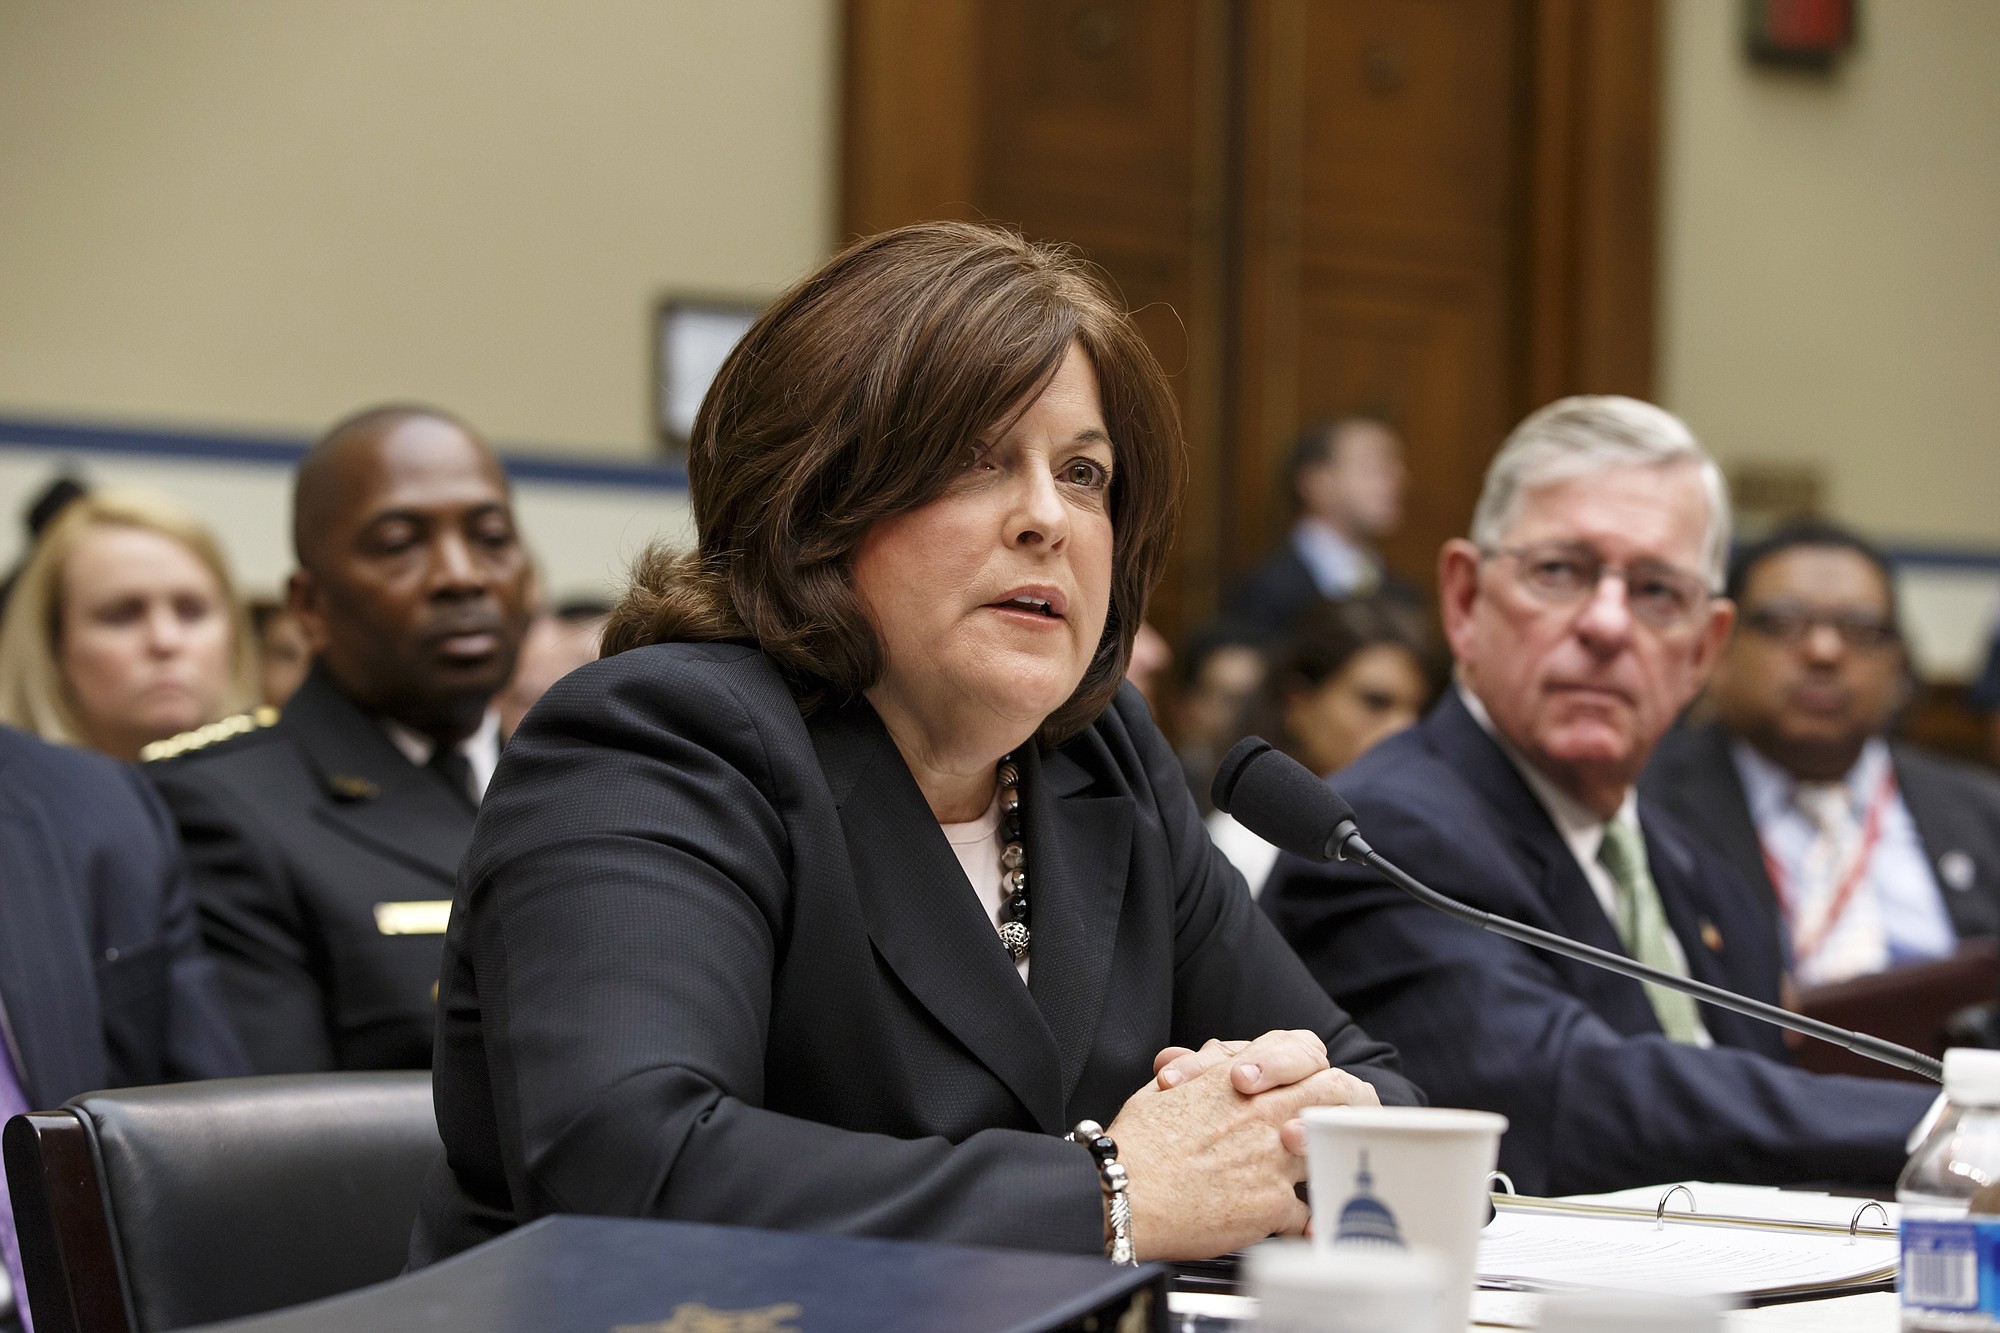 Secret Service Director Julia Pierson, left, joined by Ralph Basham, a former Secret Service director, testifies on Capitol Hill in Washington on Tuesday in front of the House Oversight Committee as it examines details surrounding a security breach at the White House when a man climbed over a fence, sprinted across the north lawn and dash deep into the executive mansion before finally being subdued.